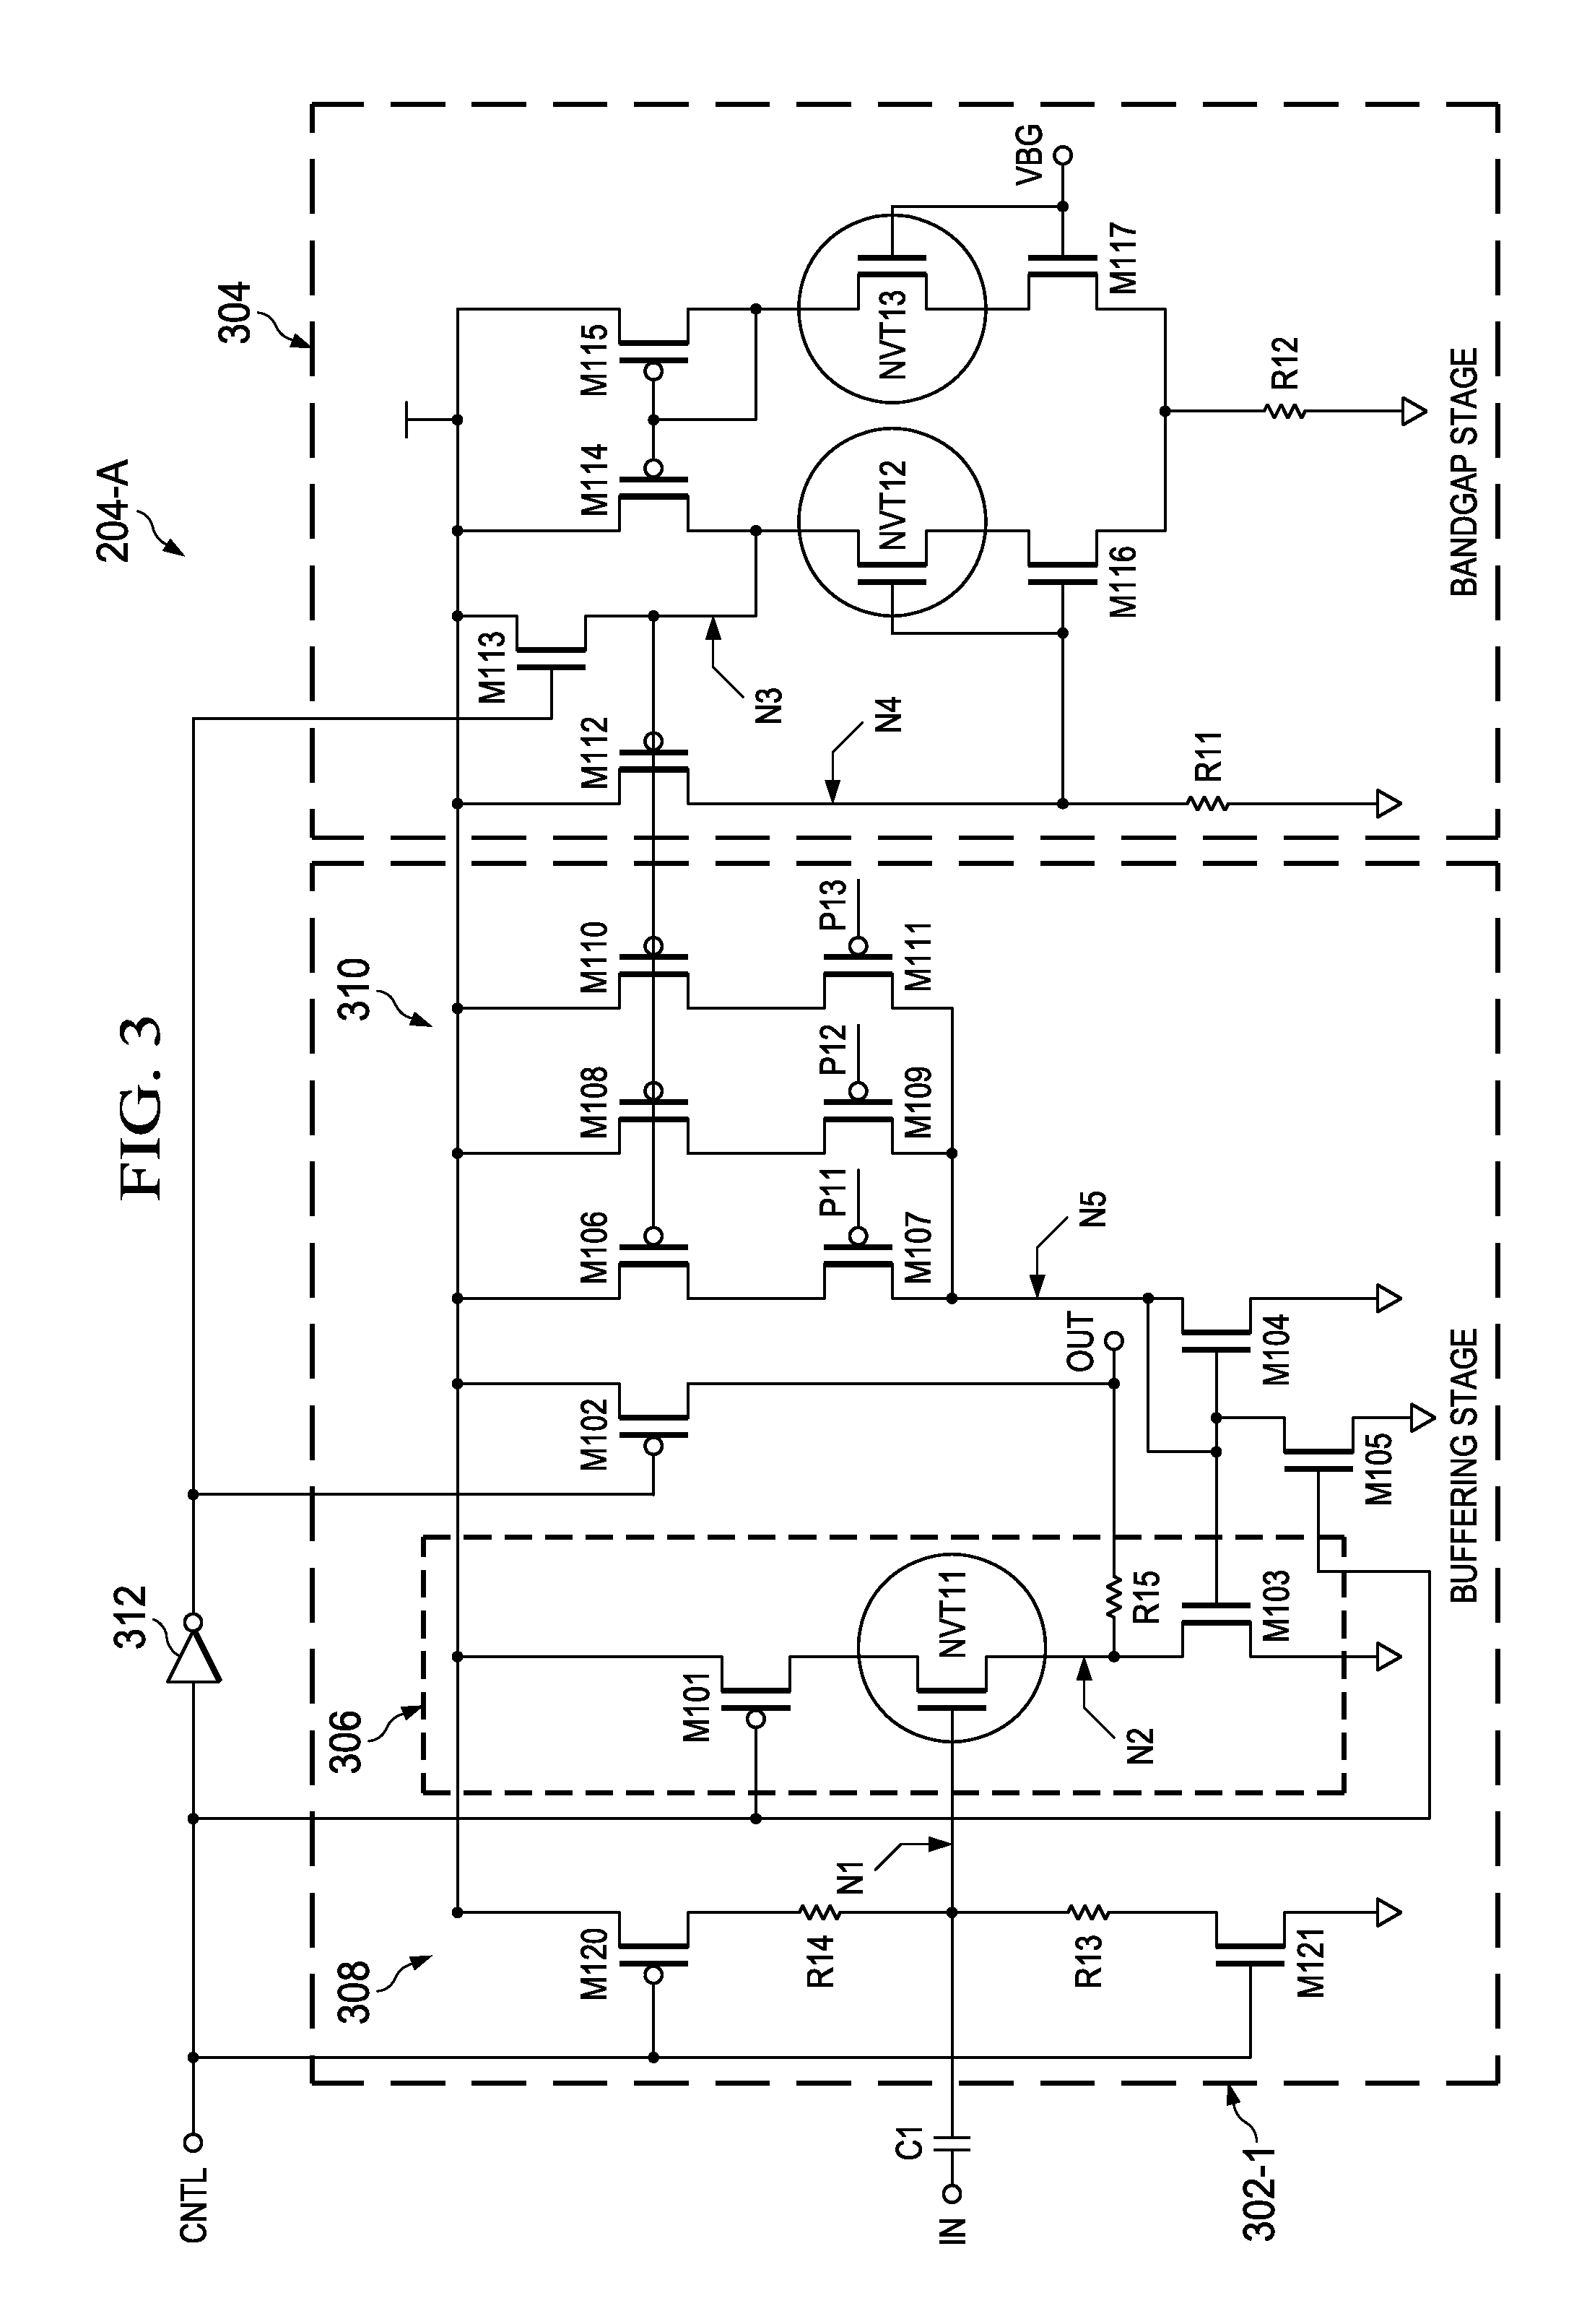 Buffer for temperature compensated crystal oscillator signals